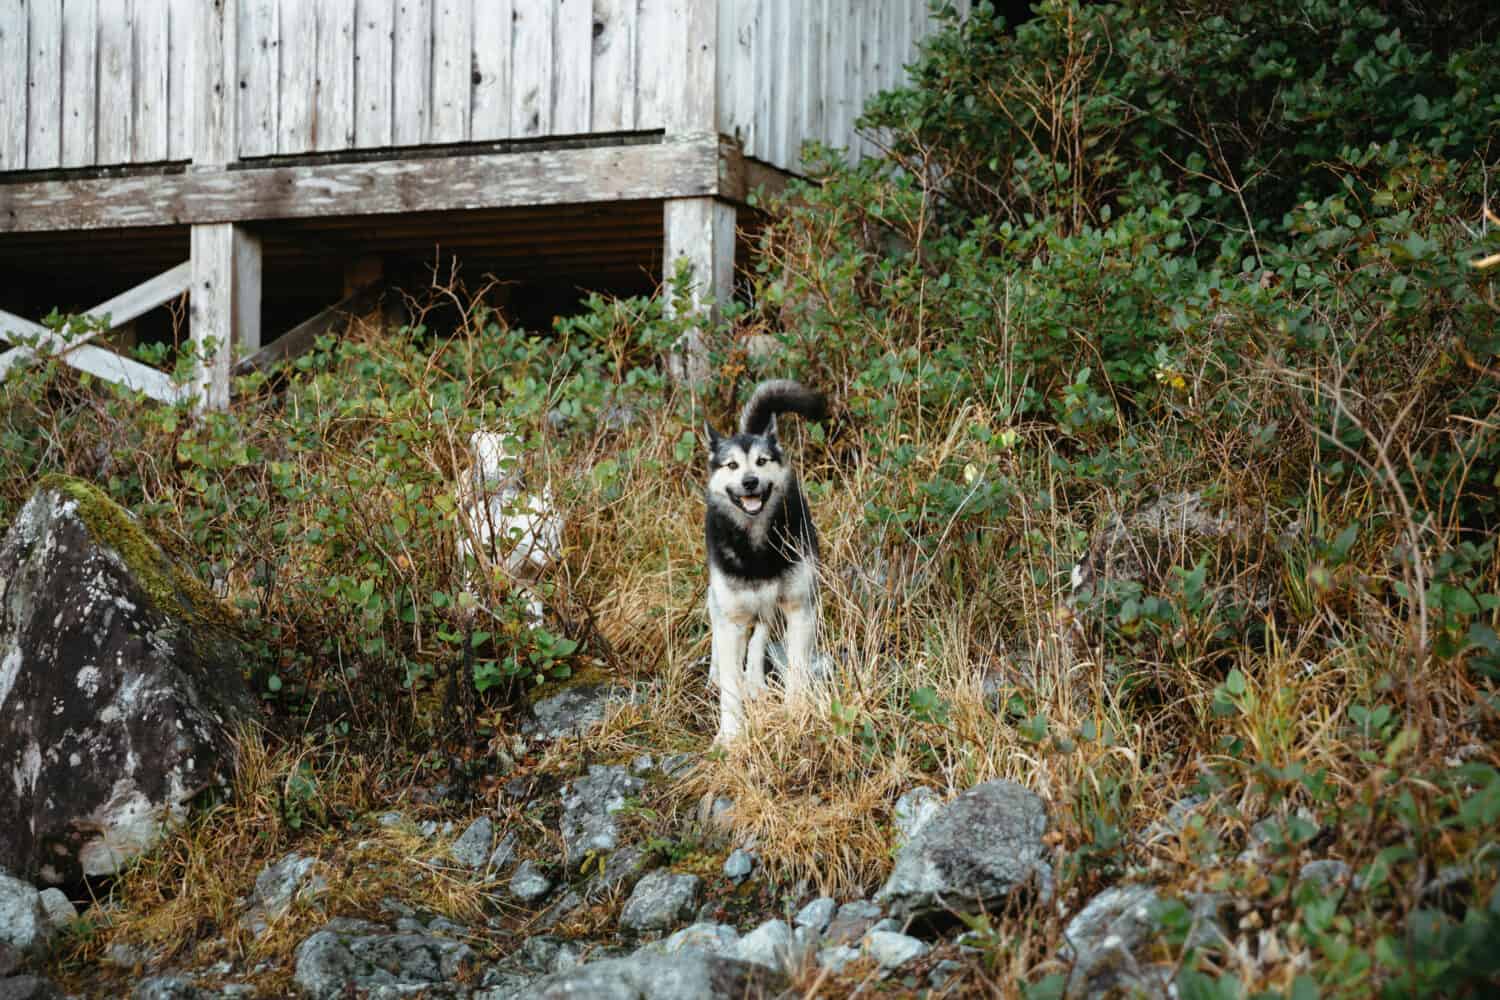 Wild dogs at hot springs cove vancouver island - TheMandagies.com